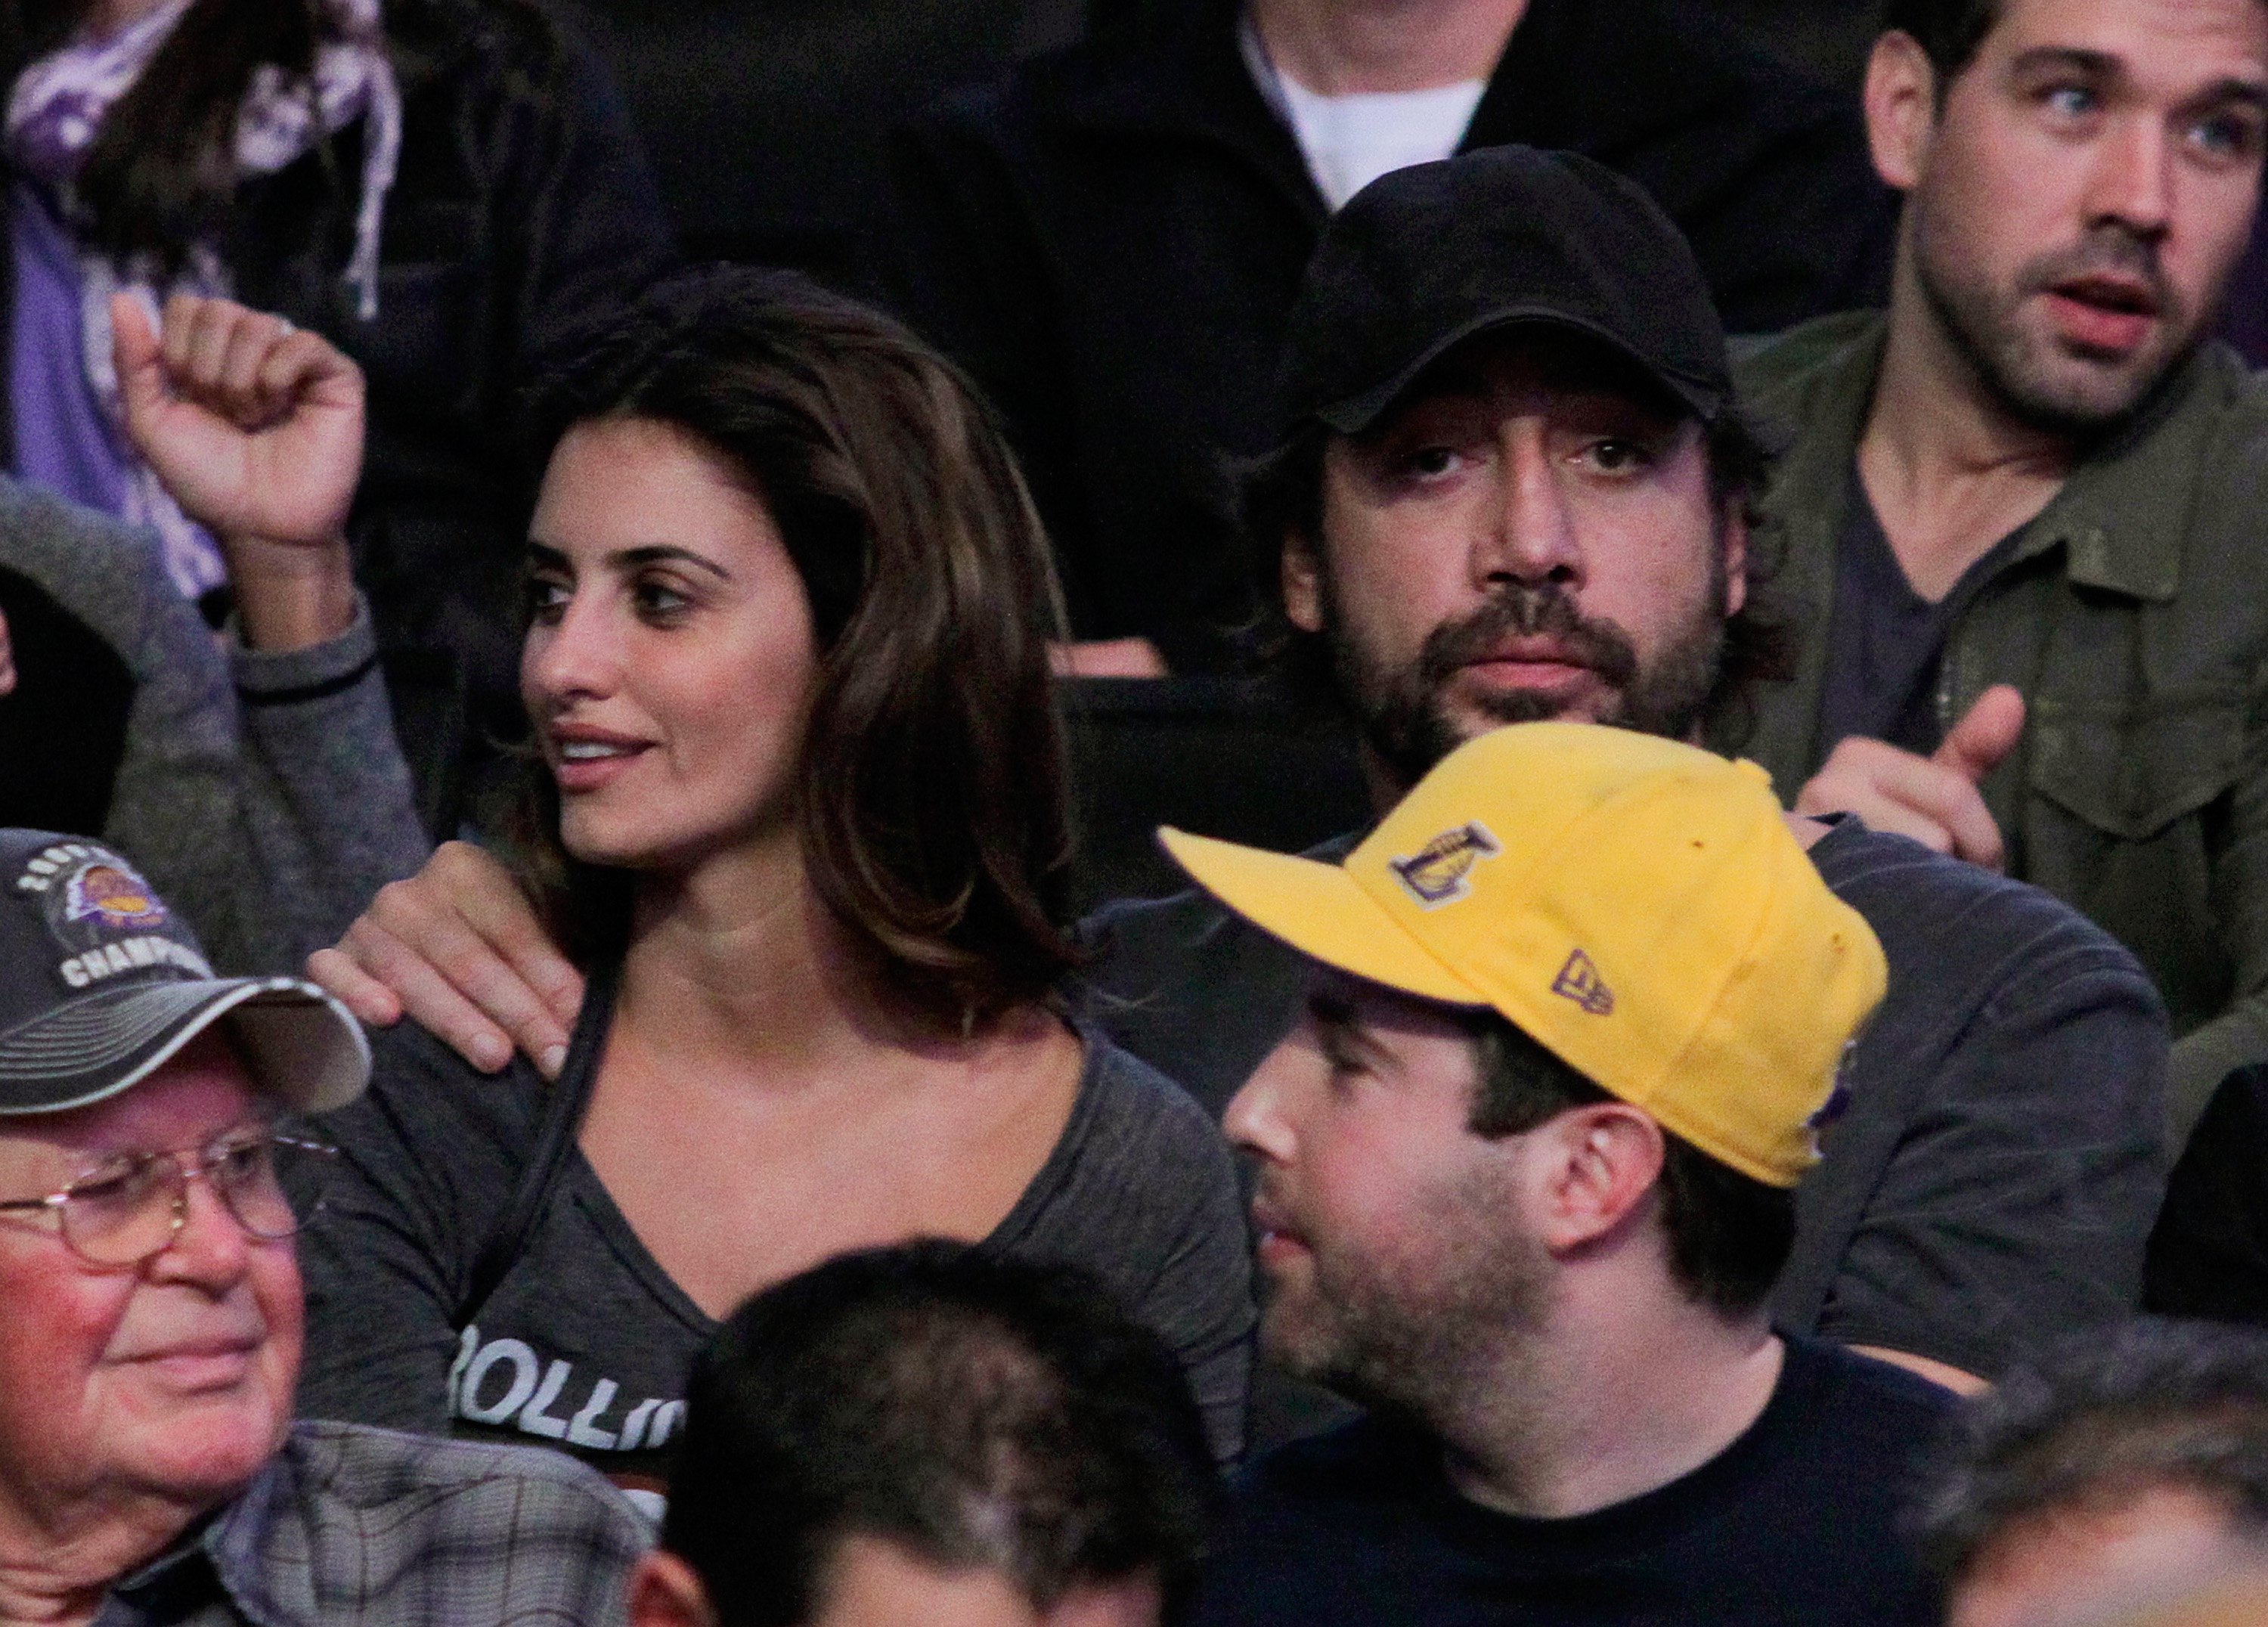 Penelope Cruz and Javier Bardem at a game between the Orlando Magic and the Los Angeles Lakers at Staples Center on January on January 18, 2010 in Los Angeles, California. | Source: Getty Images